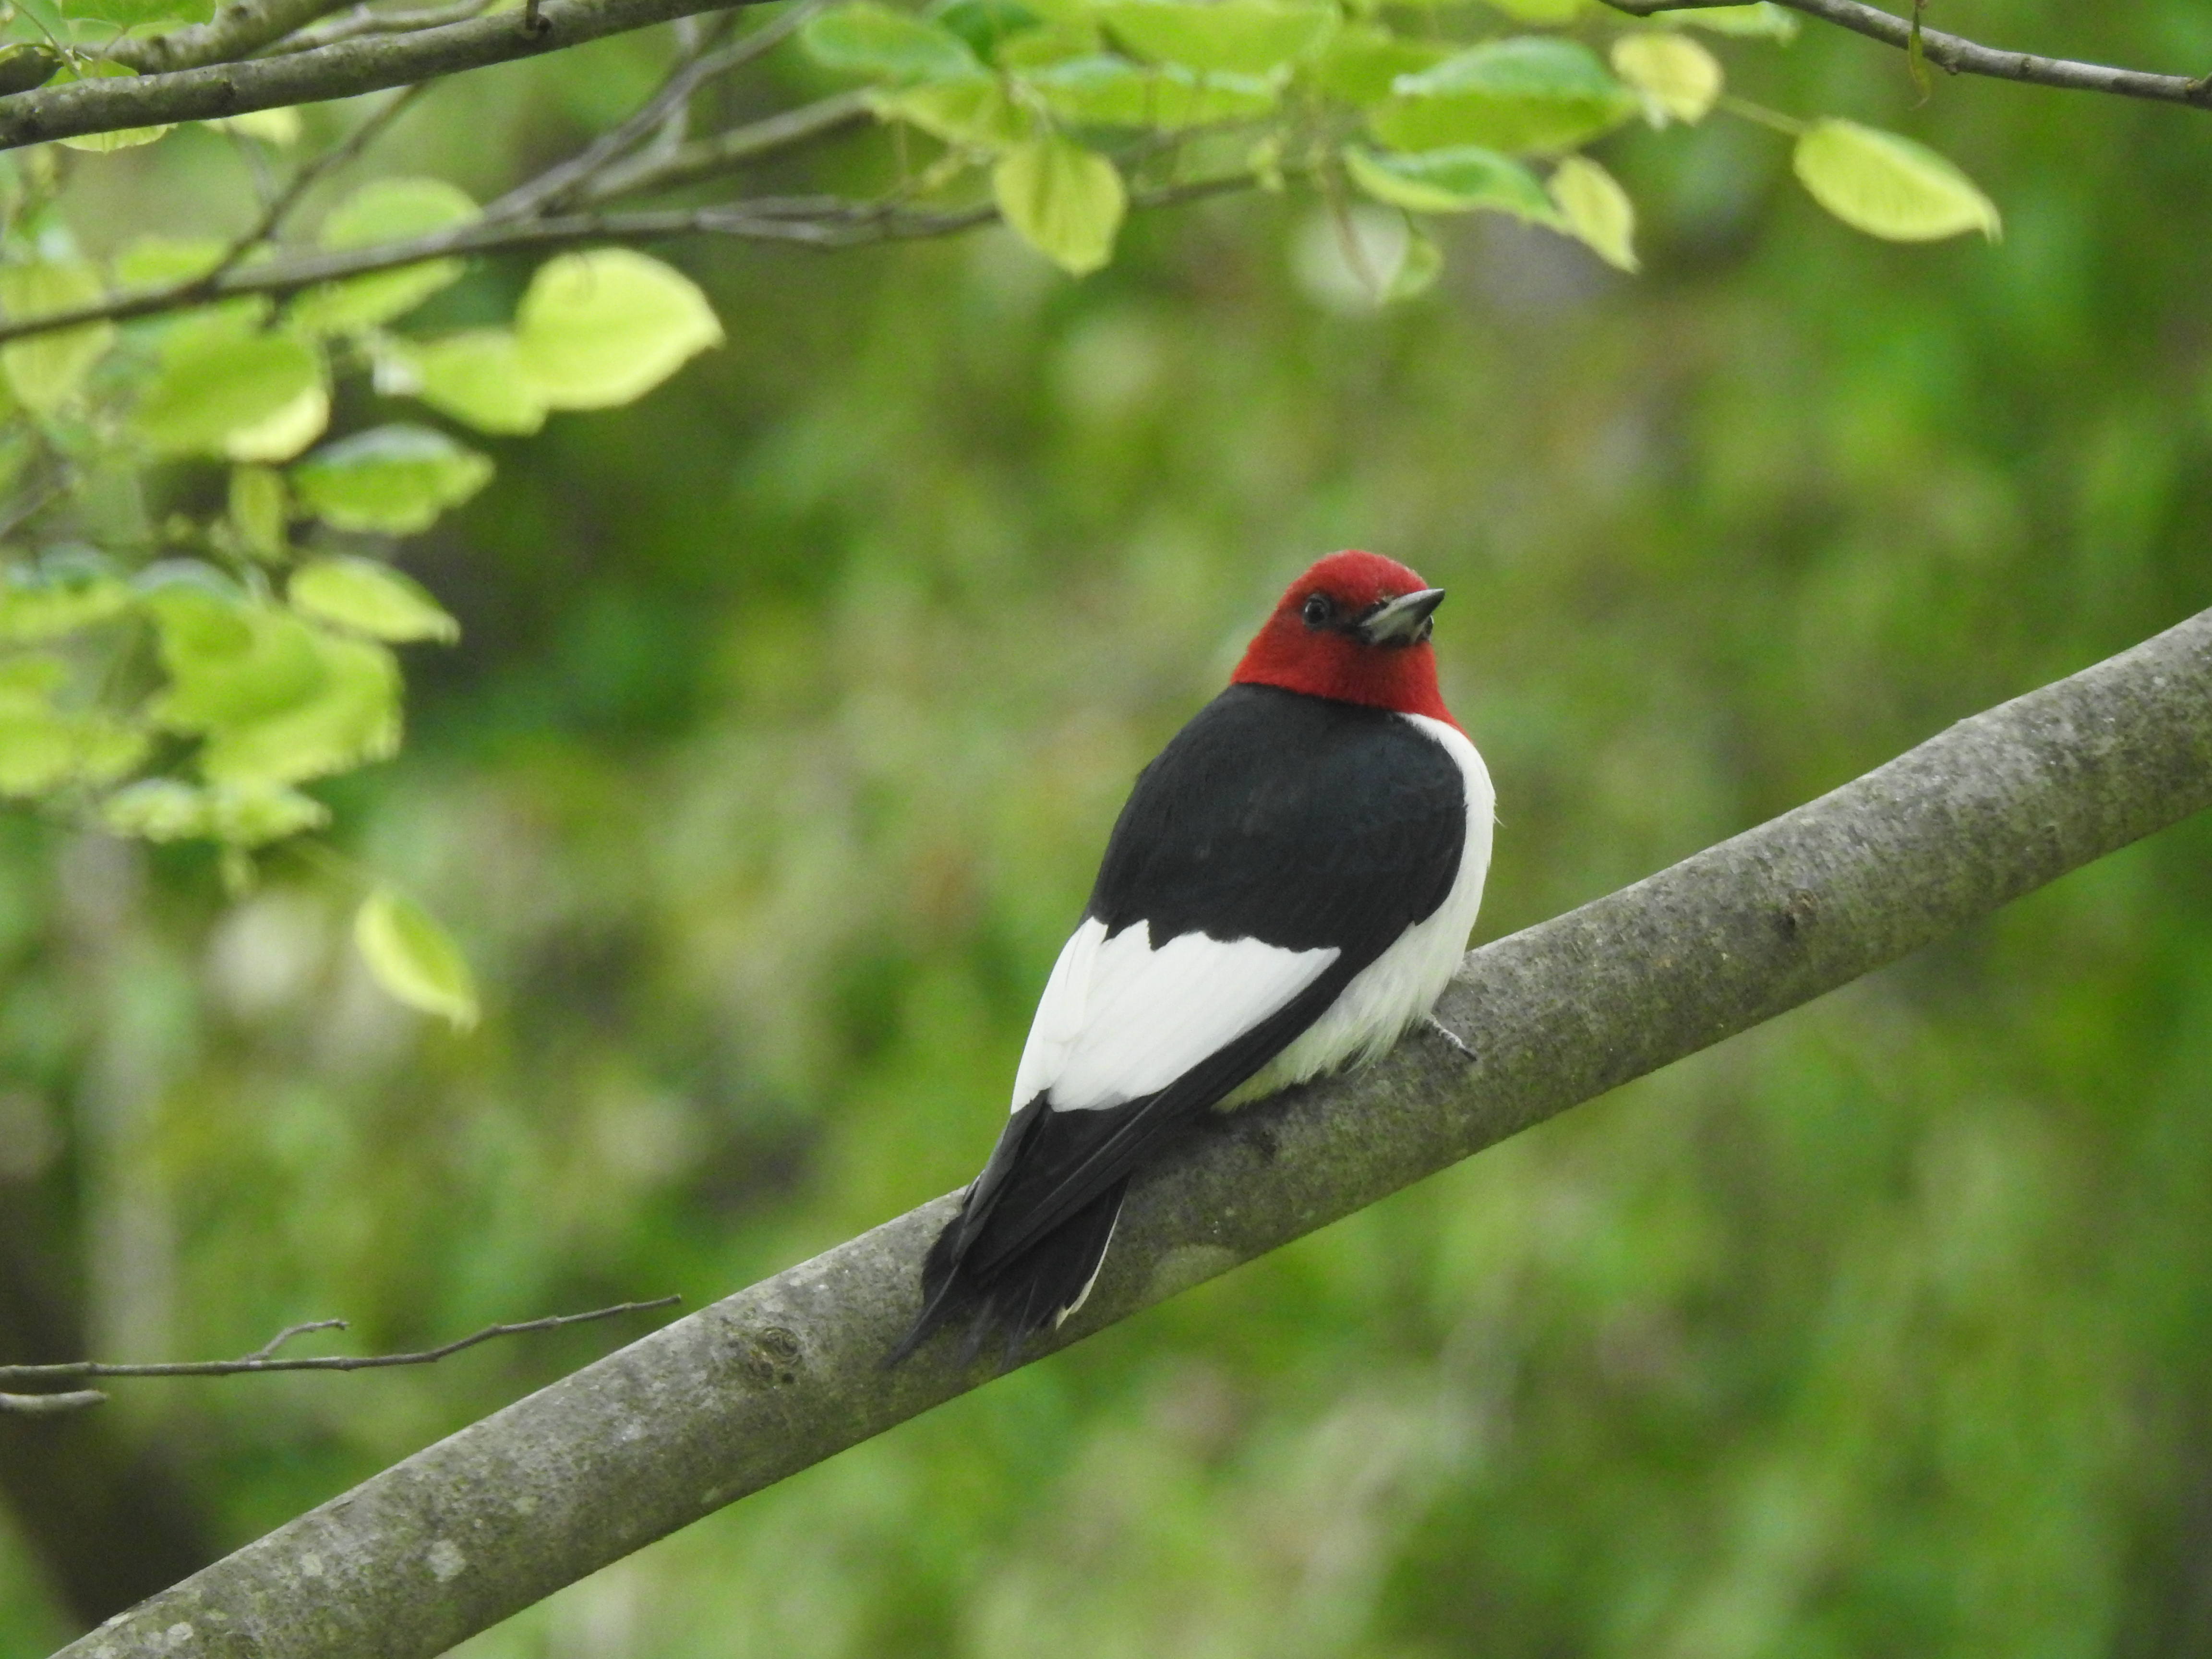 A red-headed woodpecker sitting on a branch in a redbud tree.